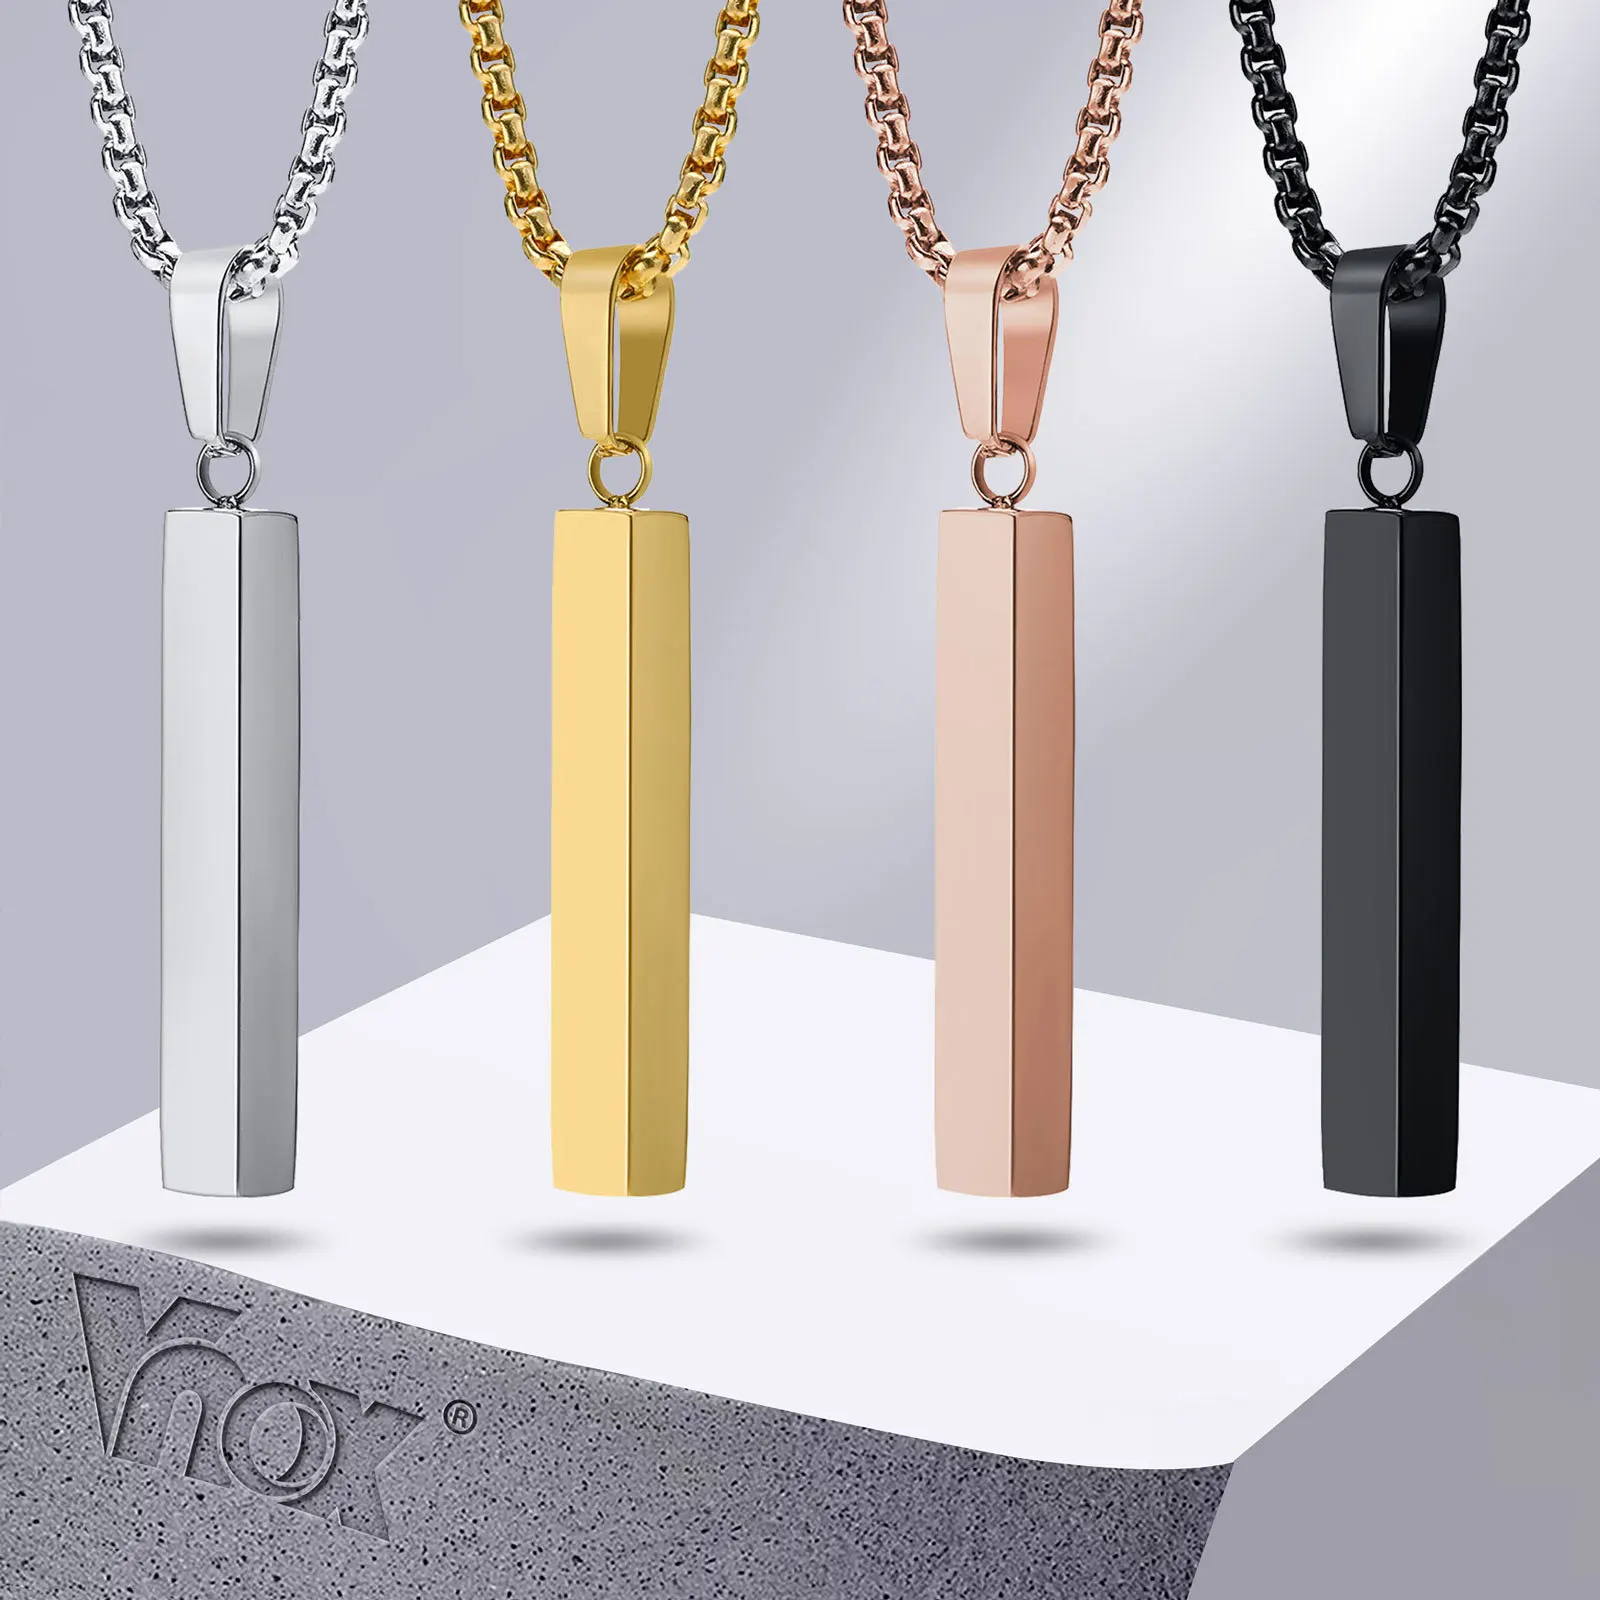 

Vnox Stylish Rectangle Bar Men Pendant Necklace,Classic Stainless Steel Box Chain Neck Collar for Male Jewelry Gift